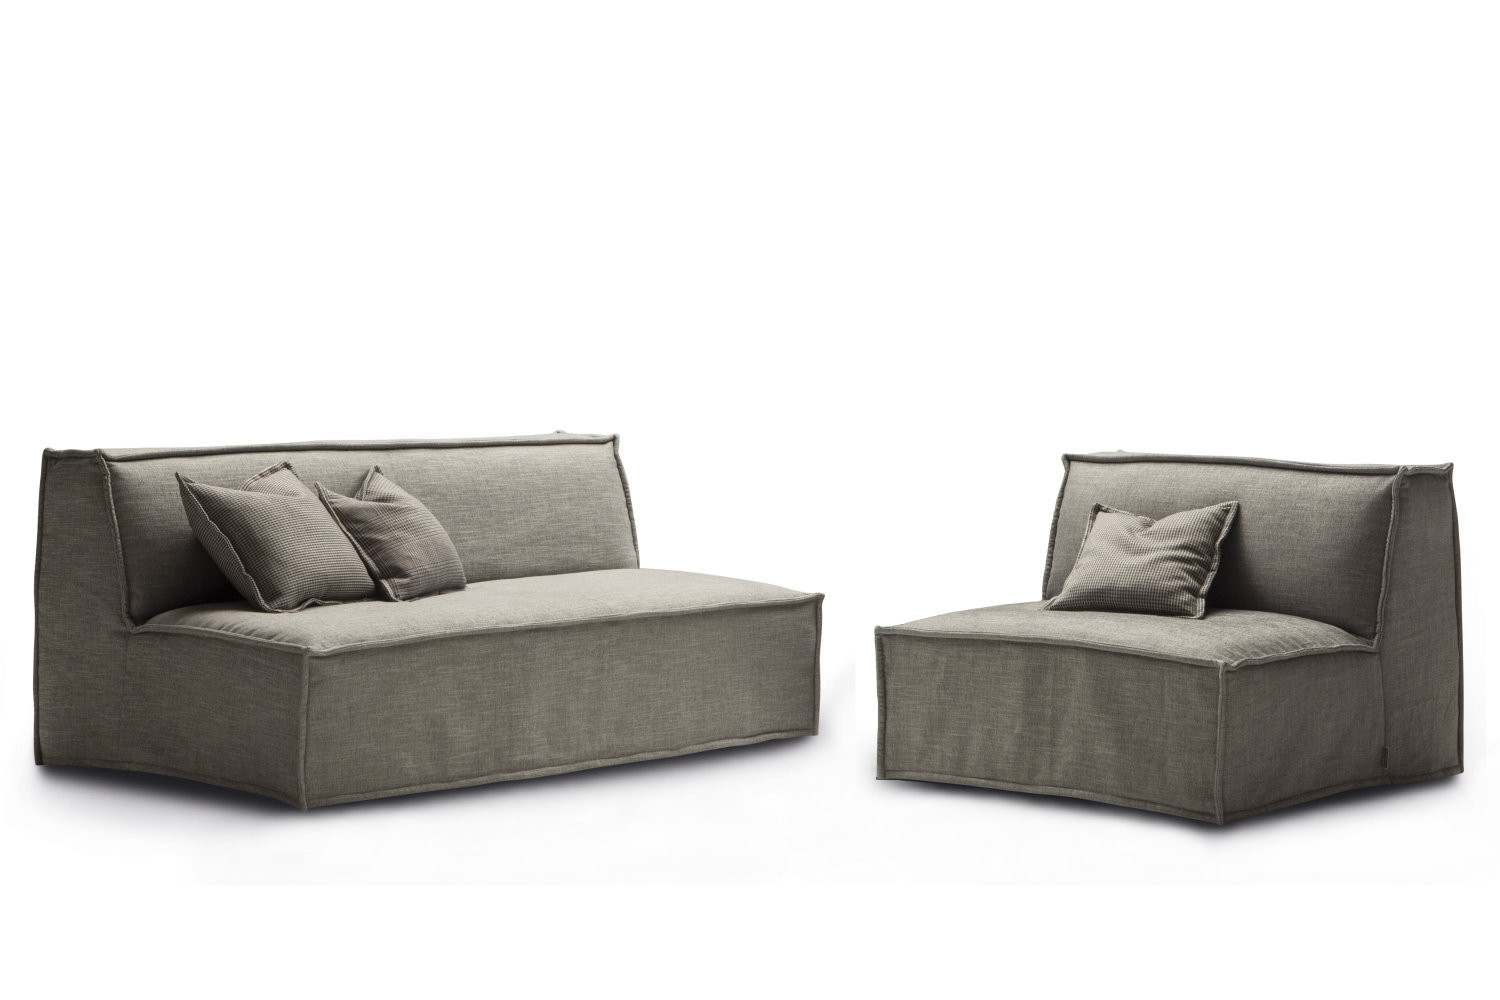 Tommy folding sofa with removable cover for Divano letto design